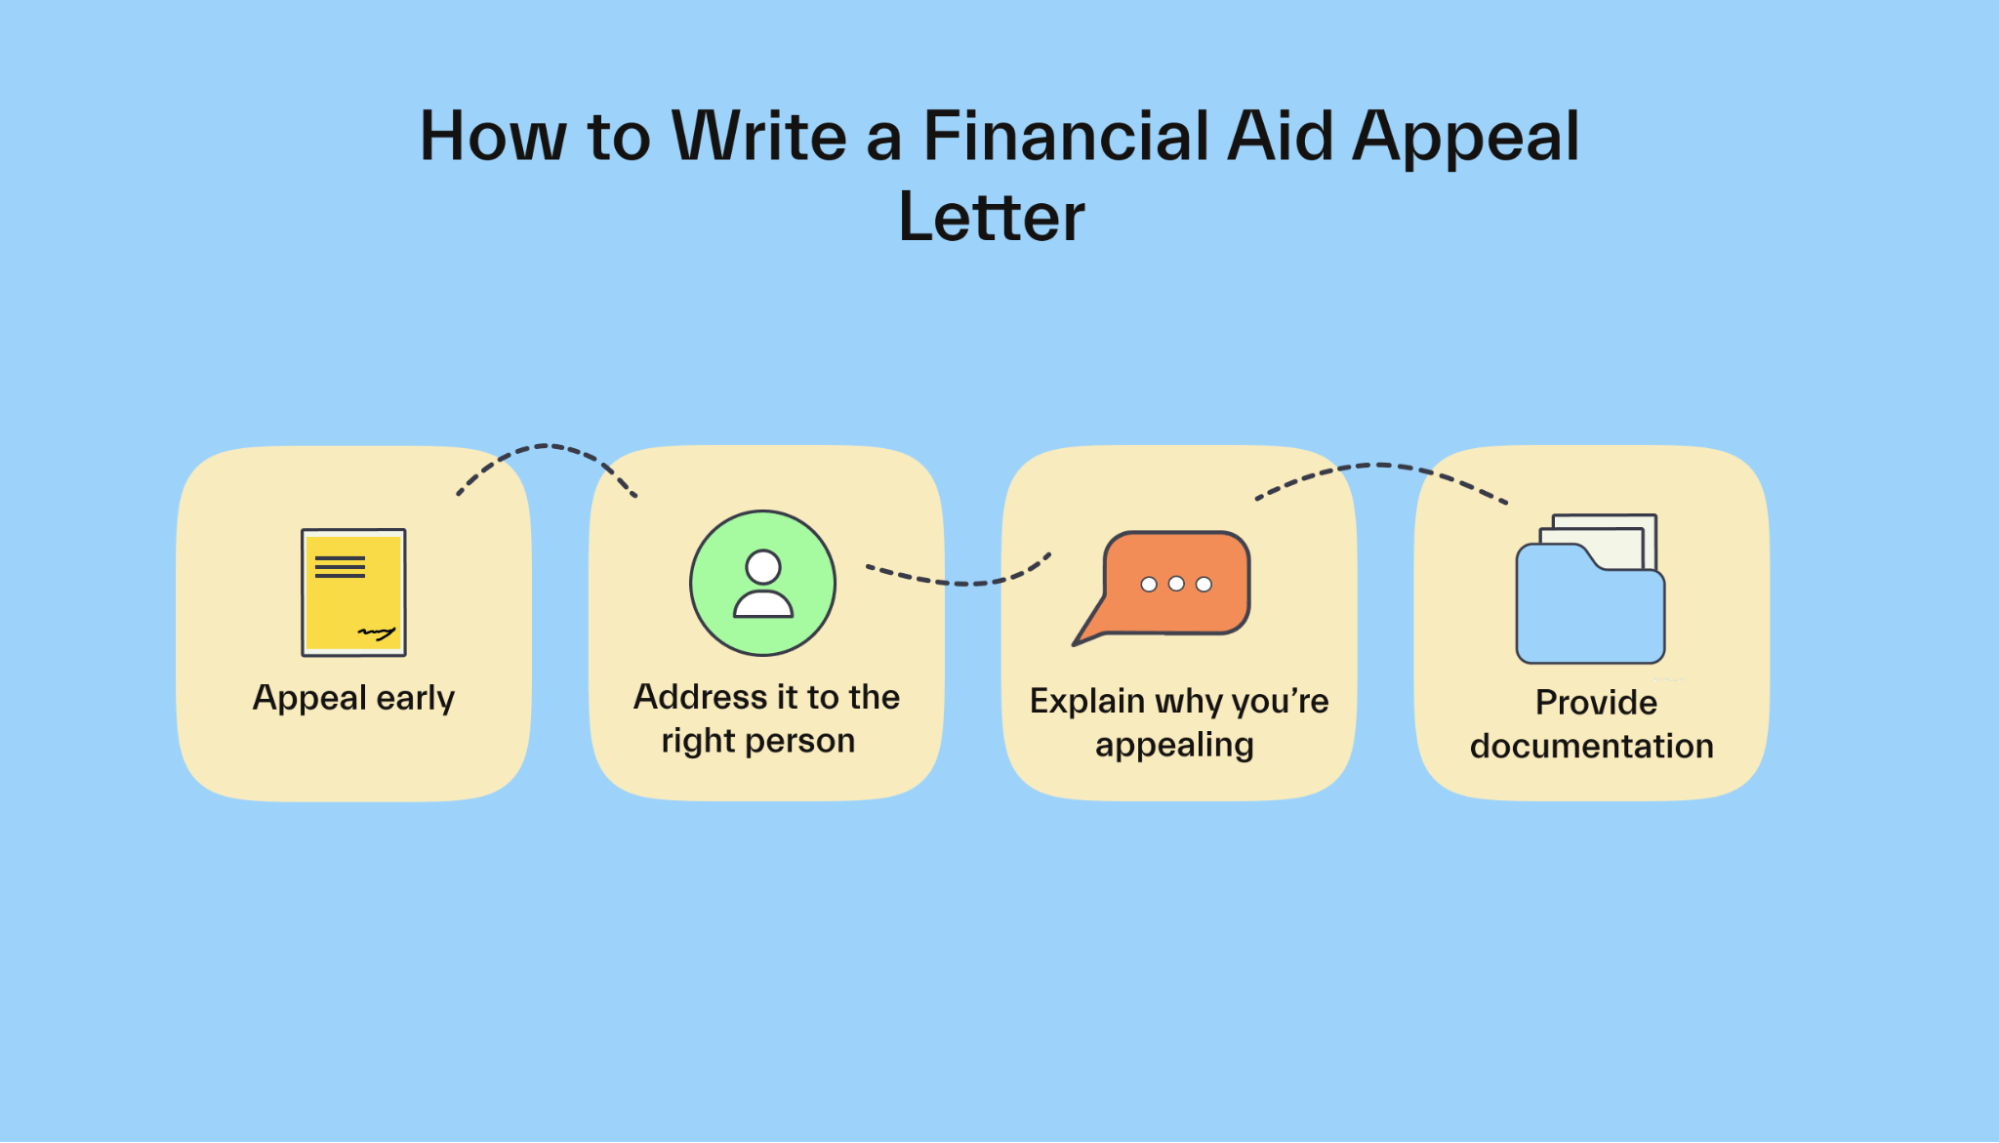 How to Write a Financial Aid Appeal Letter